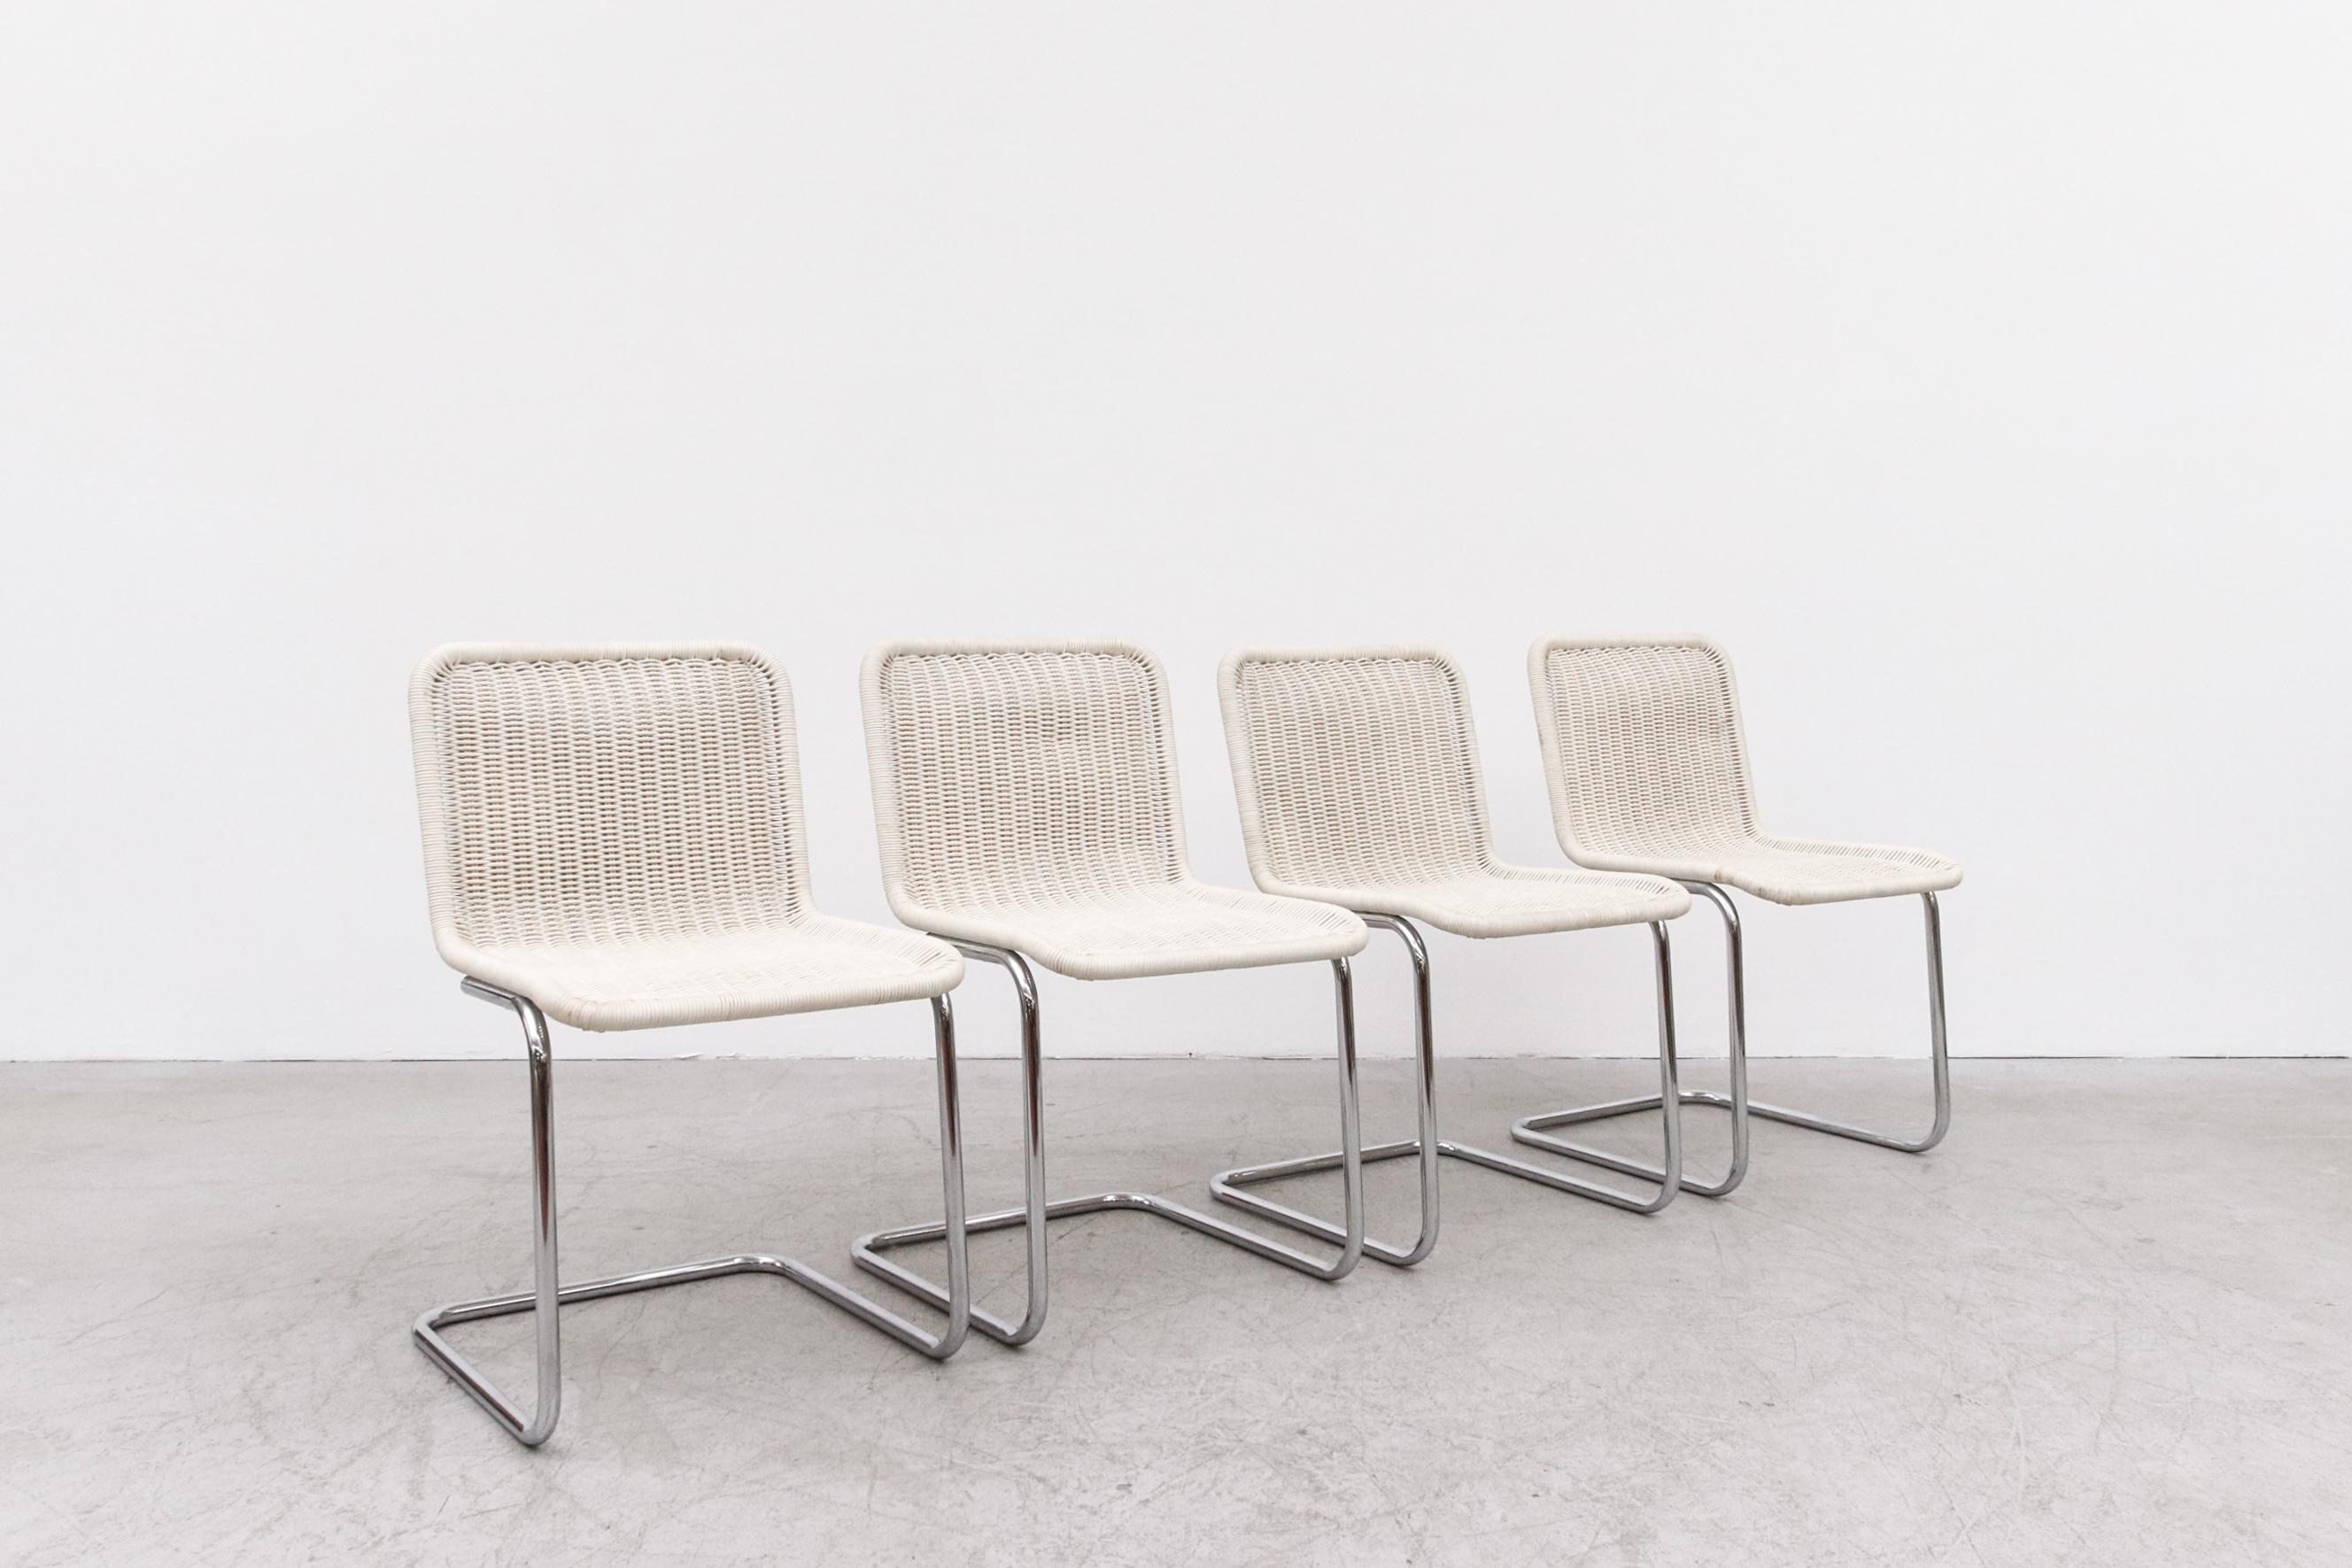 Set of 4 White Synthetic Rattan and Chrome Cantilevered side chairs. All in original condition with visible signs of wear, Including discoloration and minimal Rattan Loss. Set Price.